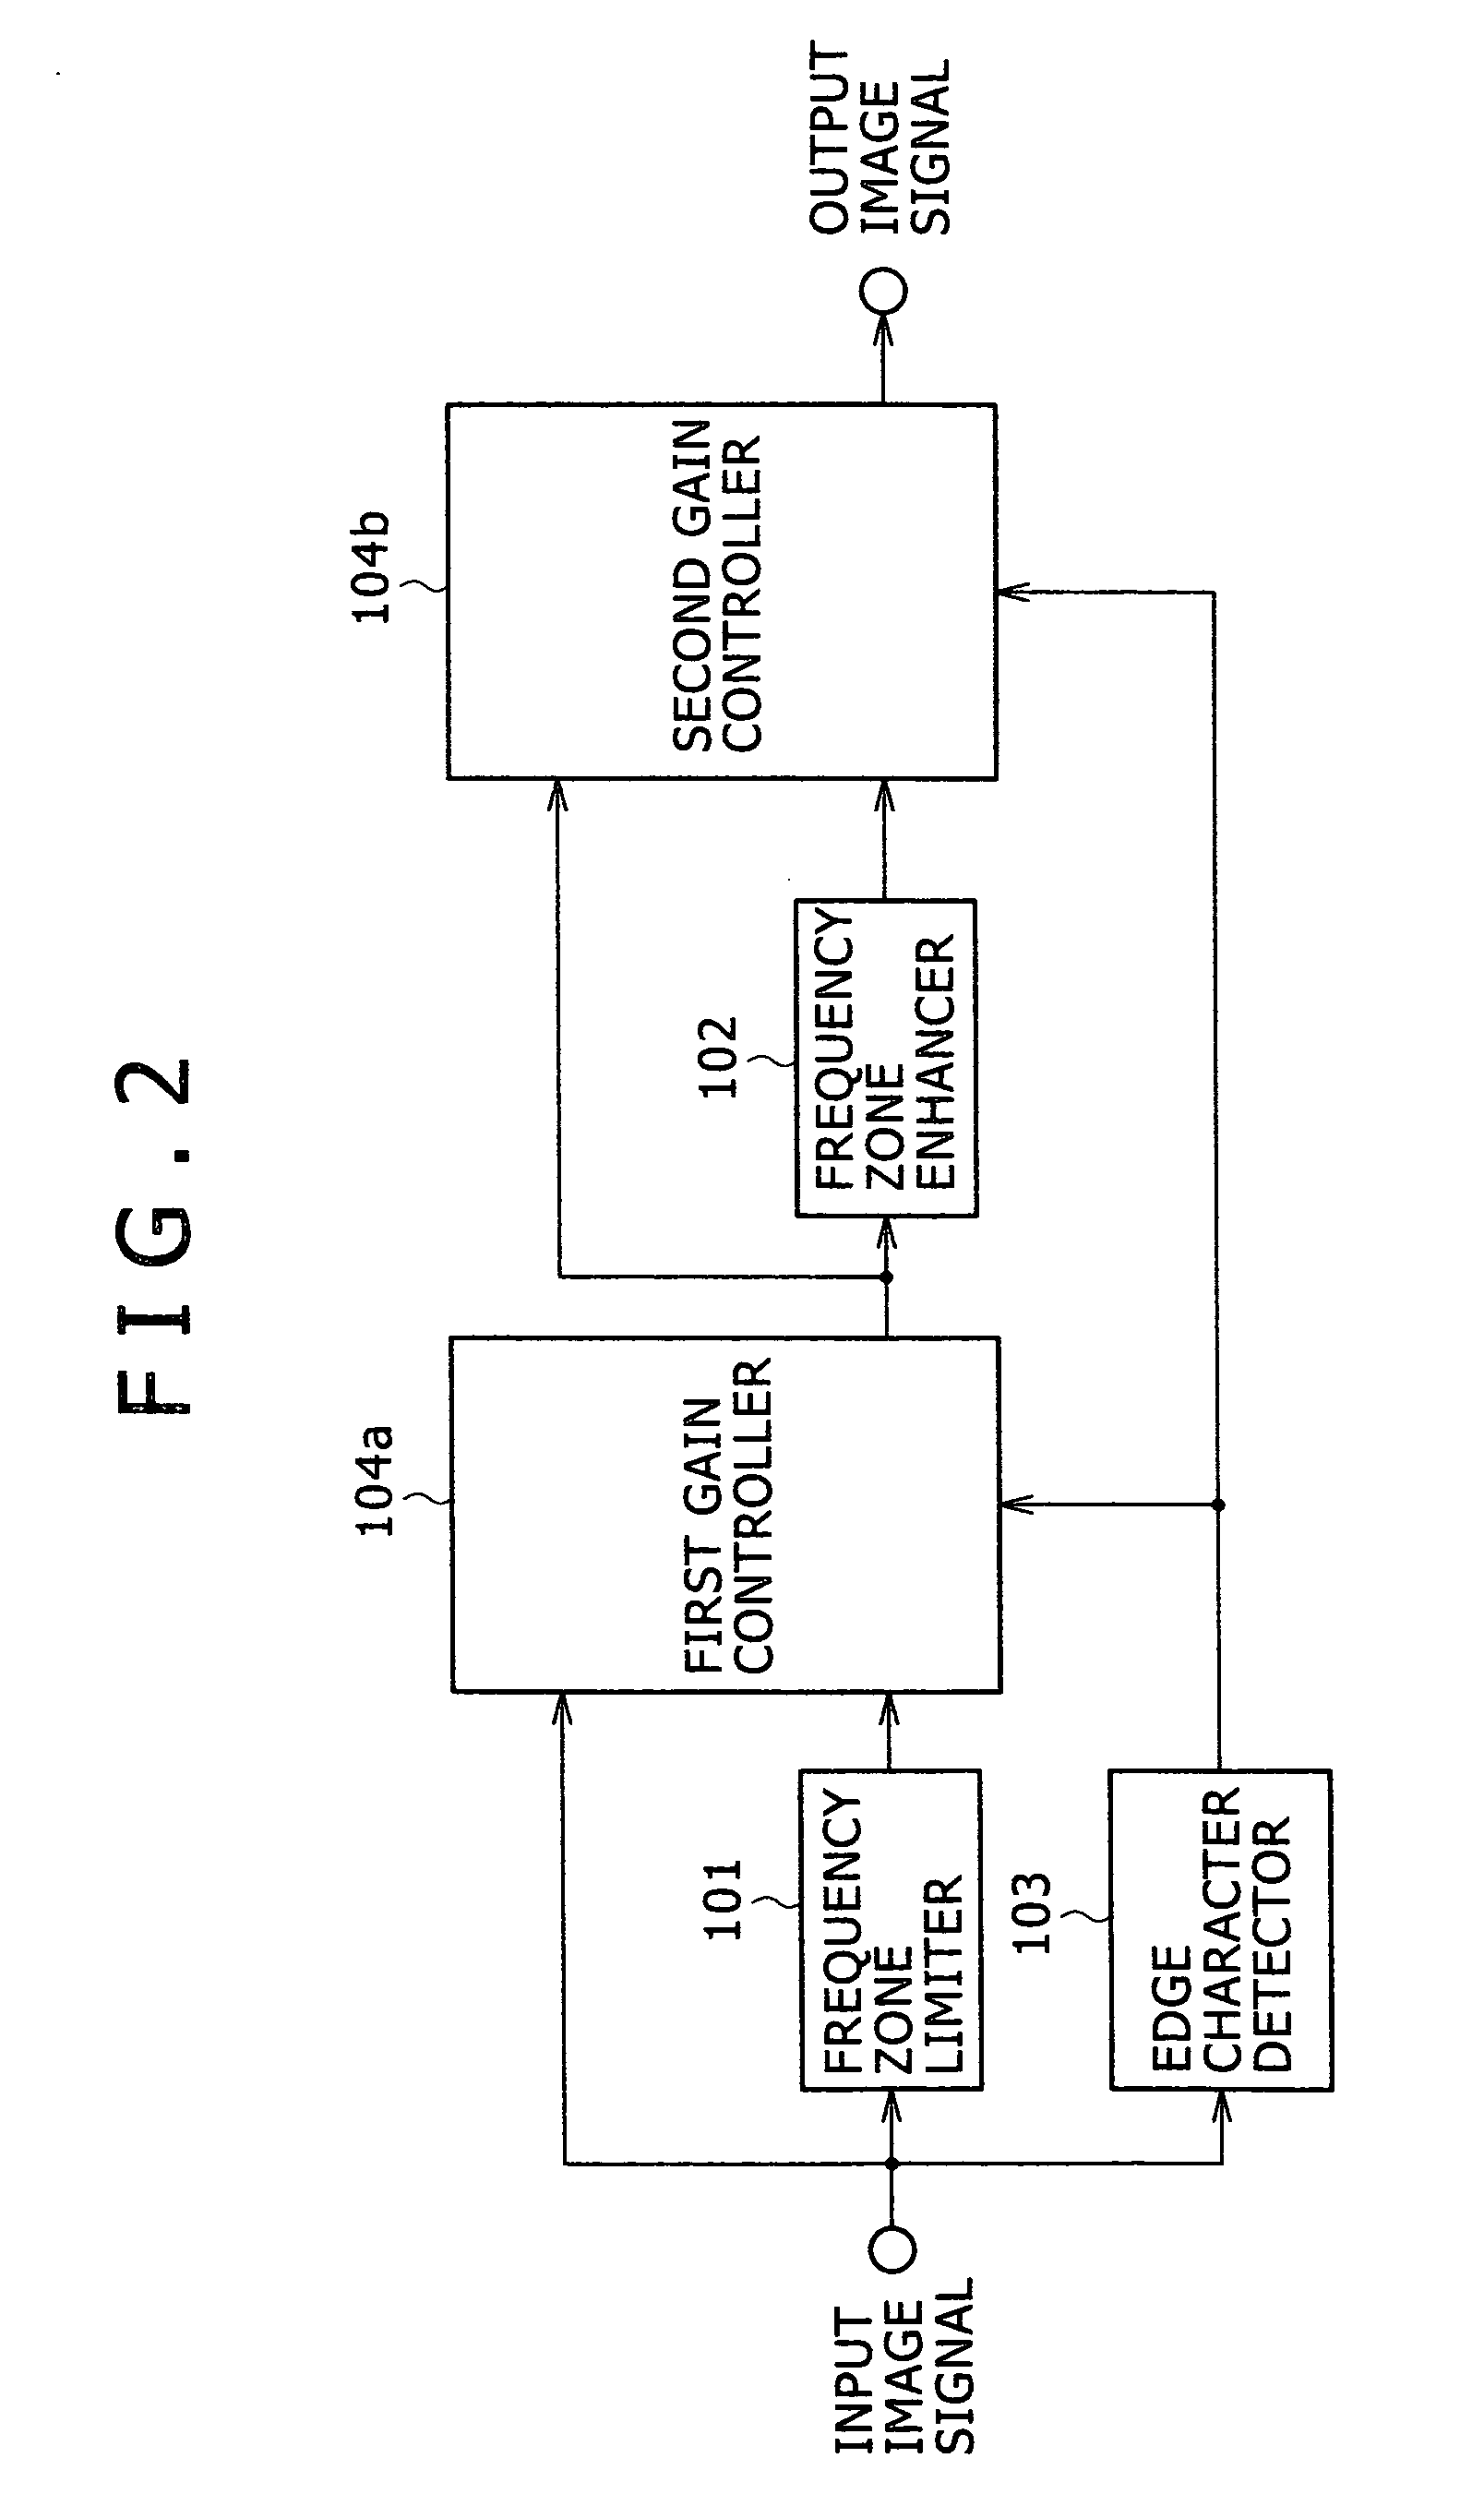 Image signal processor and image signal processing method